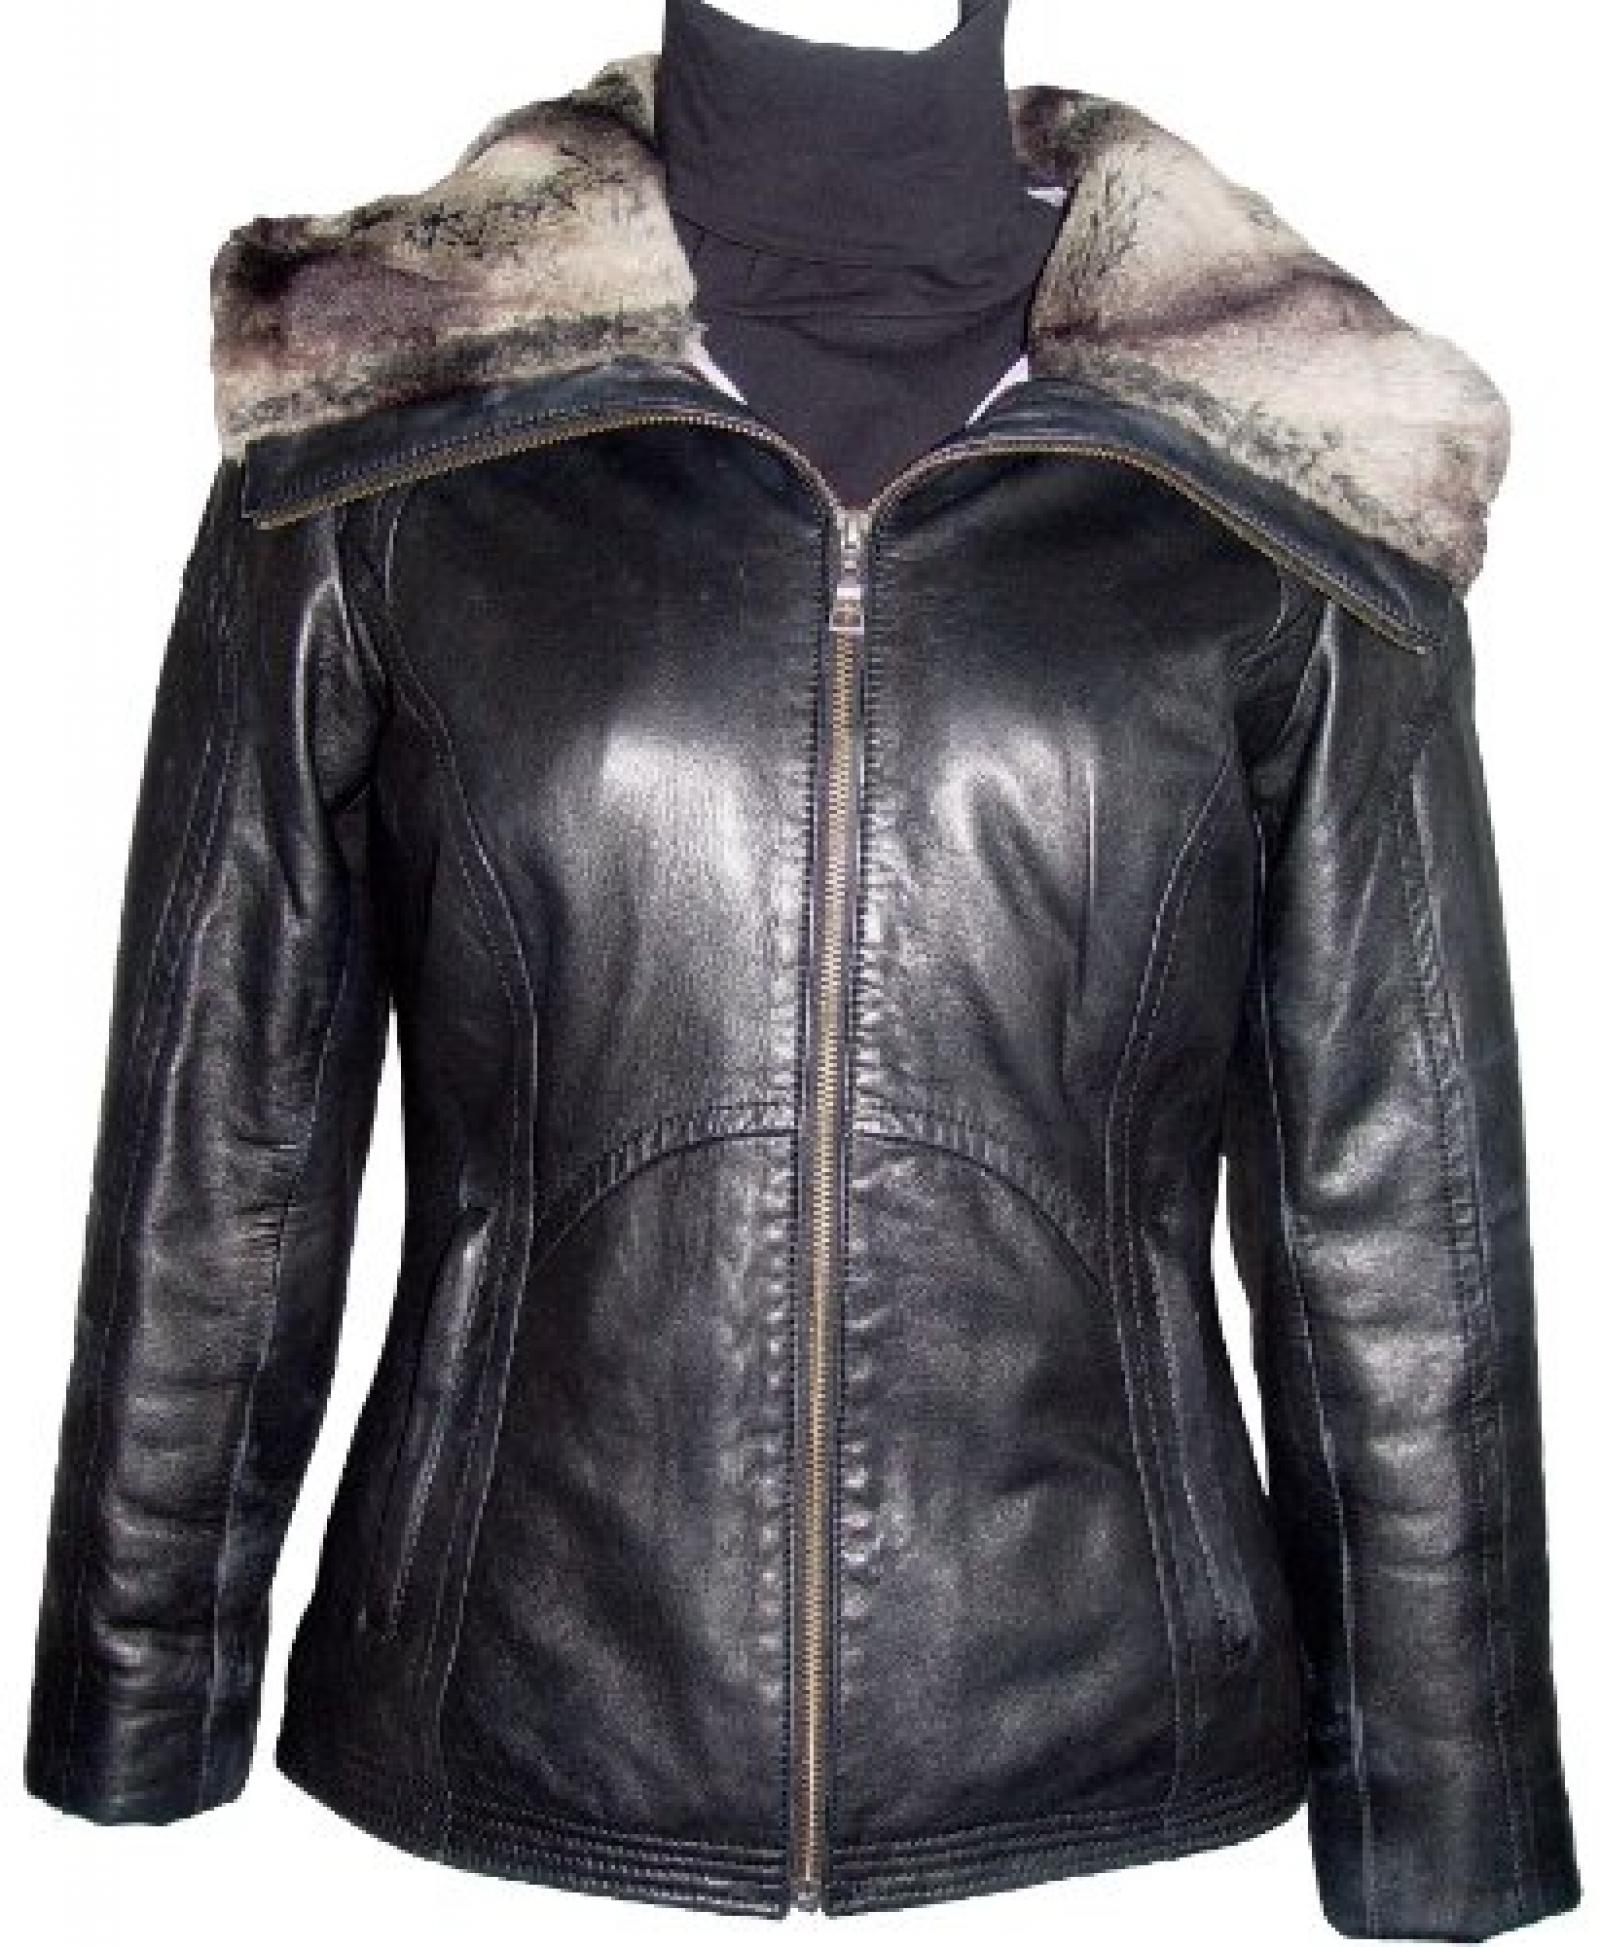 Paccilo FREE tailoring Womens 4000 Plus Size Short Leather Jacket Parka 